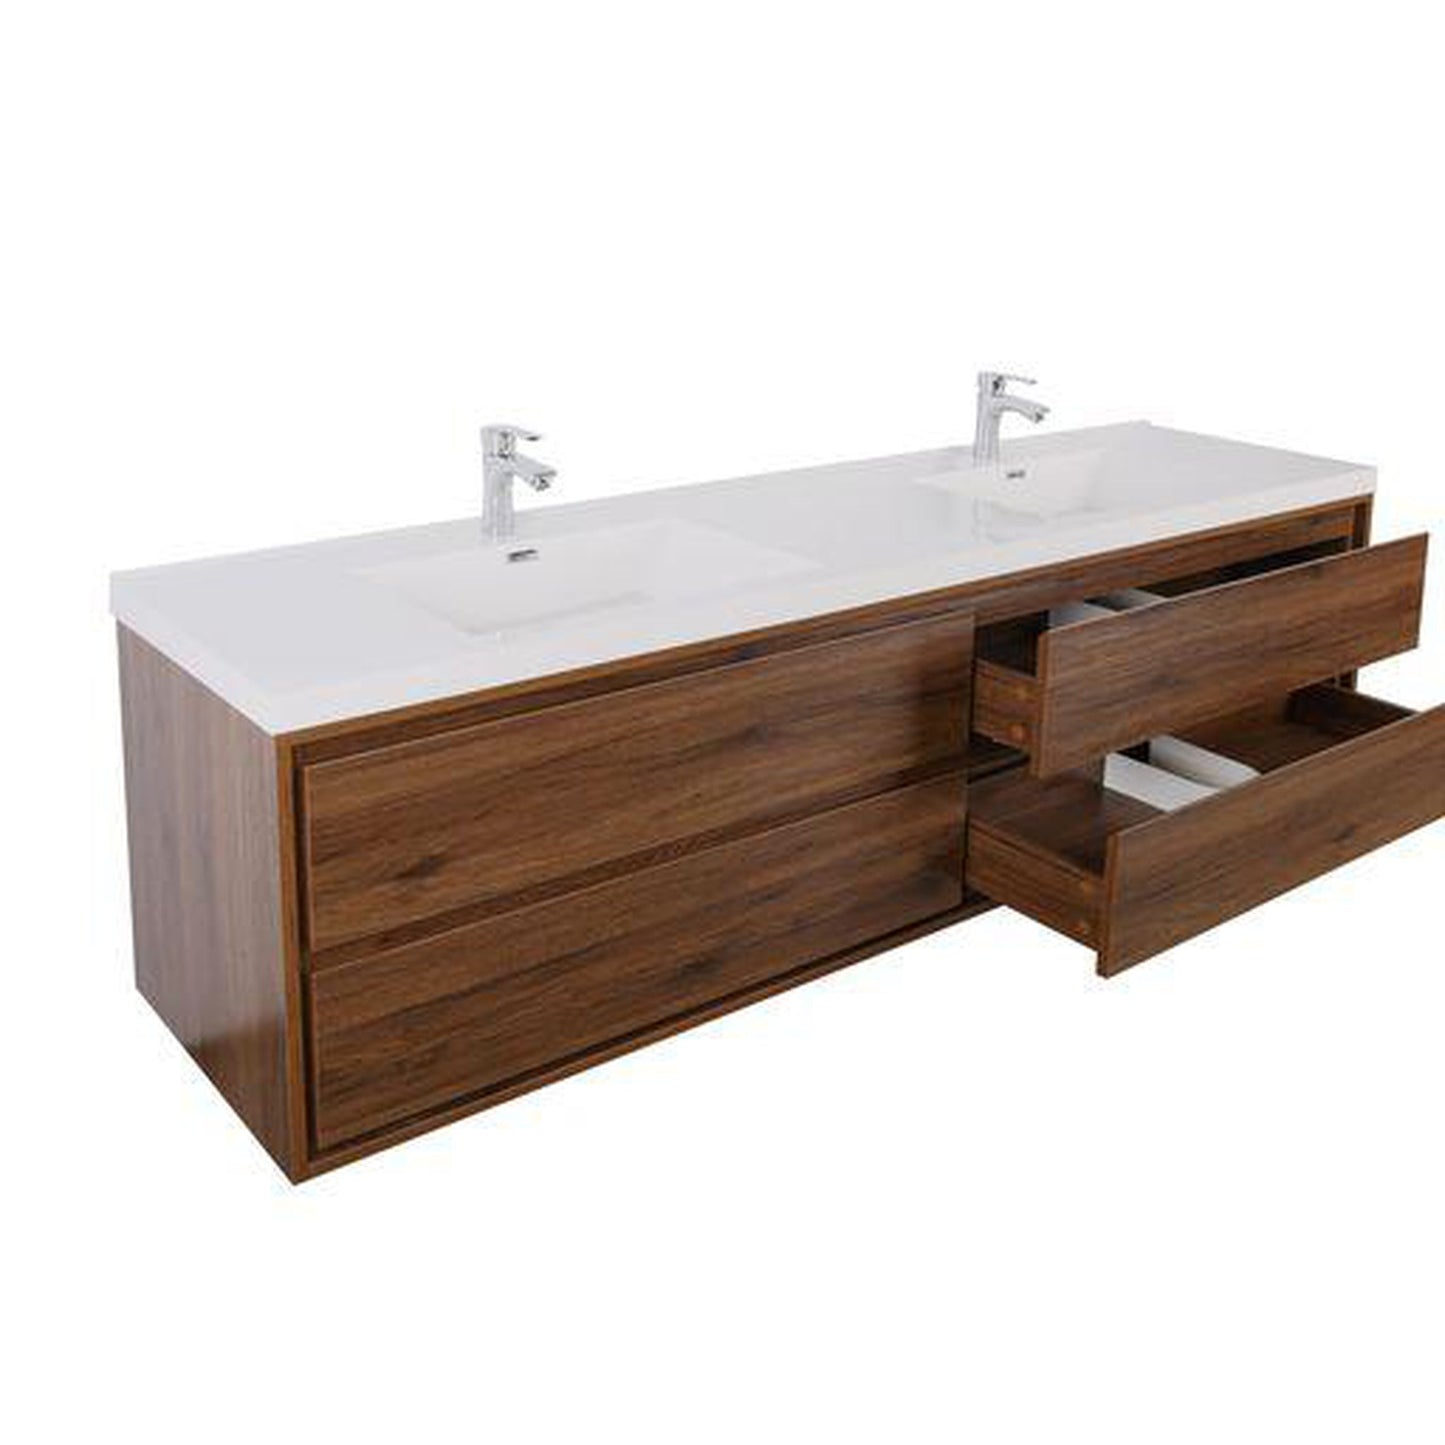 Moreno Bath Sage 72" Rosewood Wall-Mounted Modern Vanity With Double Reinforced White Acrylic Sinks